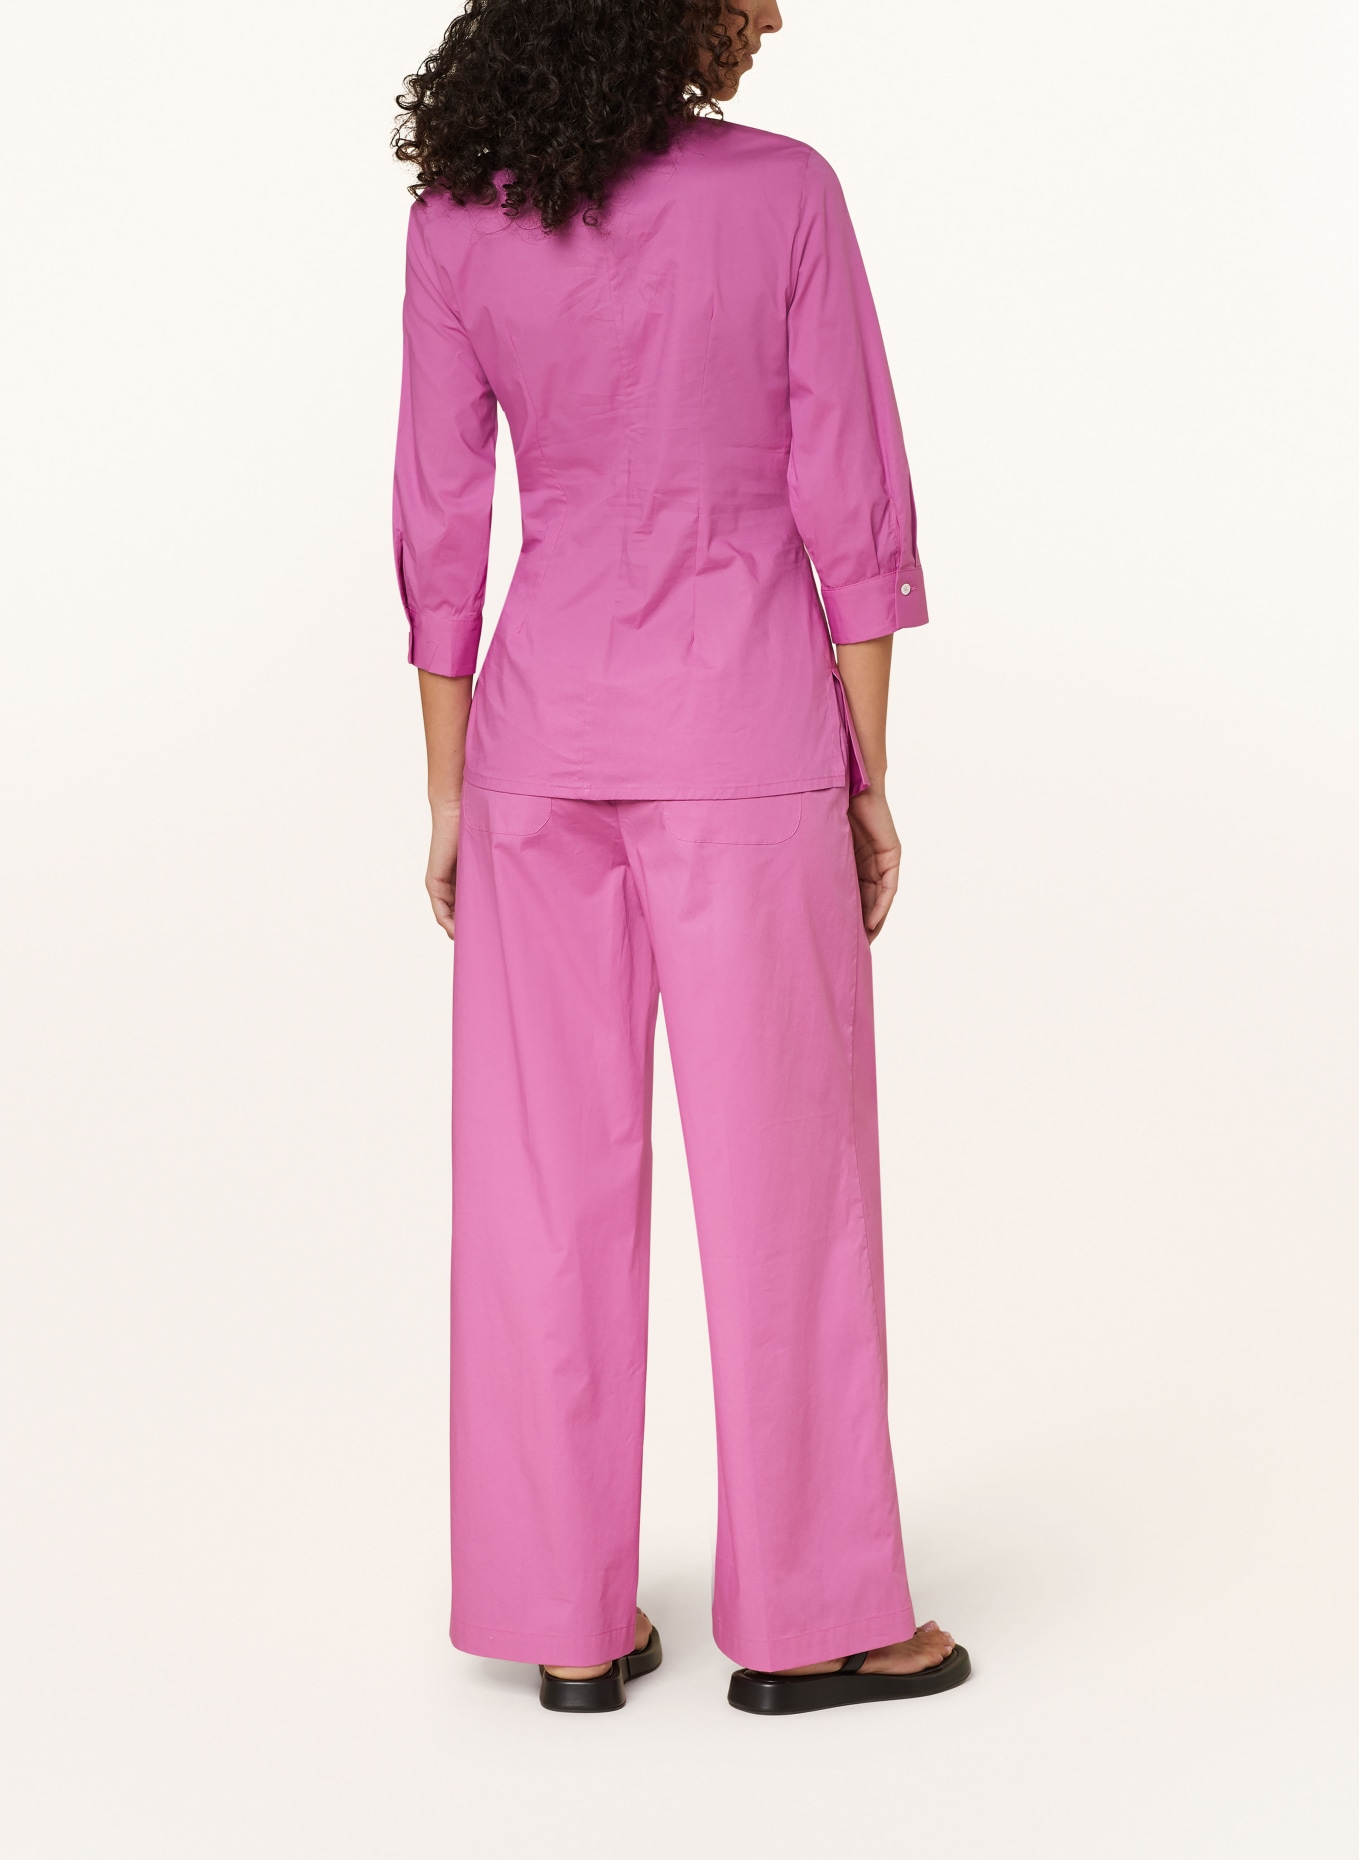 ROSSO35 Shirt blouse with 3/4 sleeves, Color: FUCHSIA (Image 3)